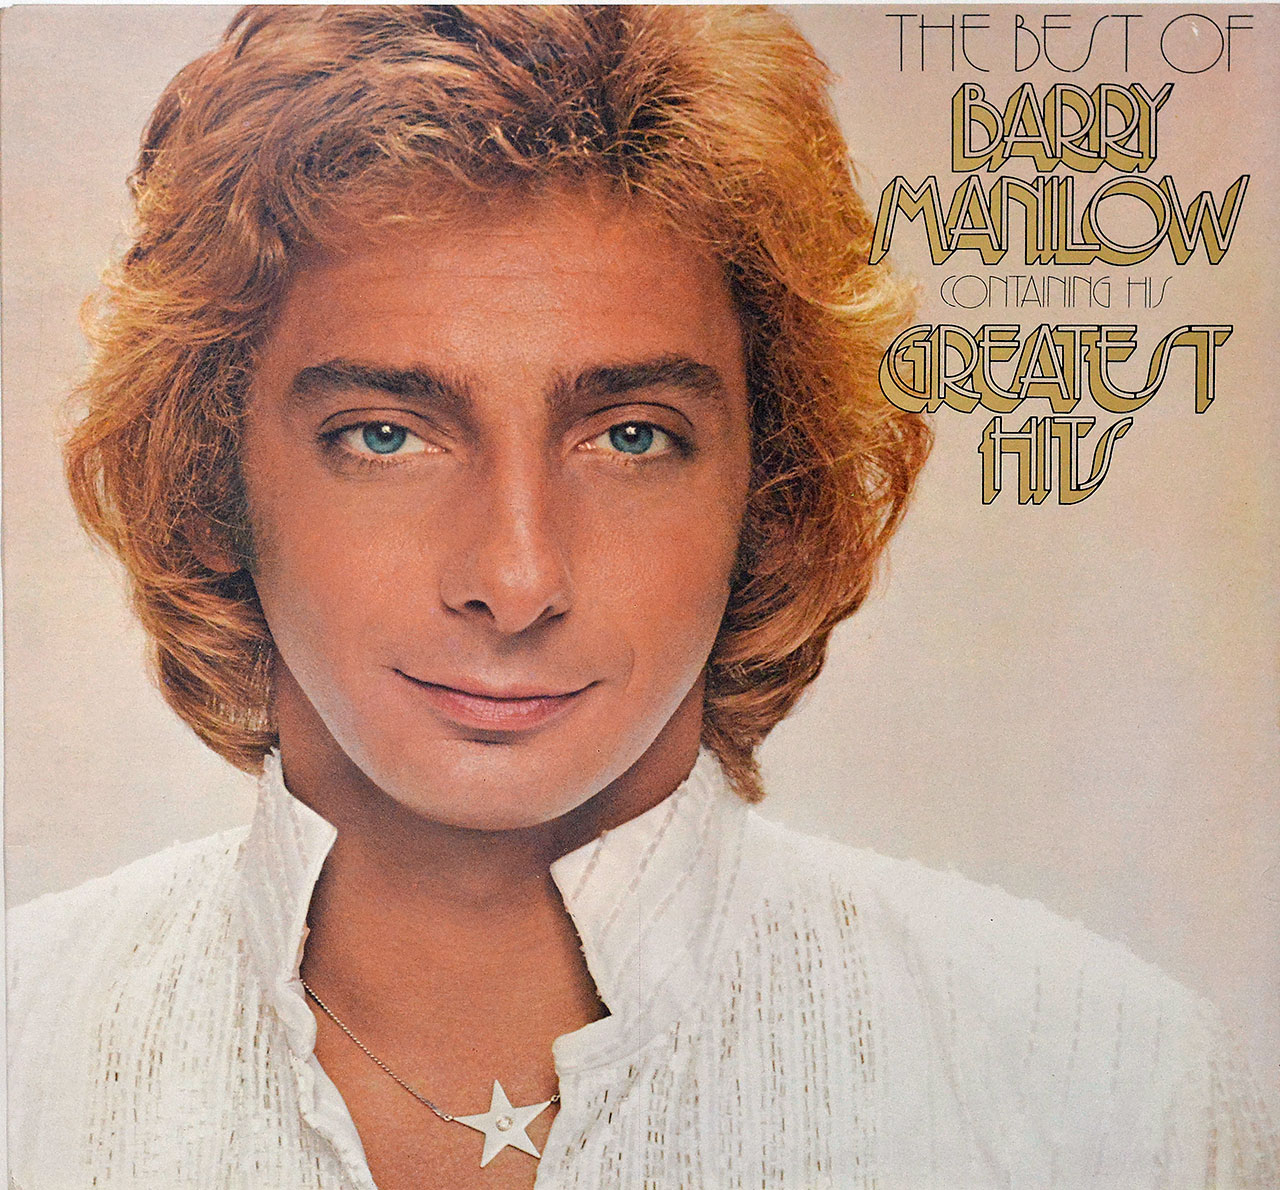 Album Front Cover Photo of BARRY MANILOW - The Best of Barry Manilow  